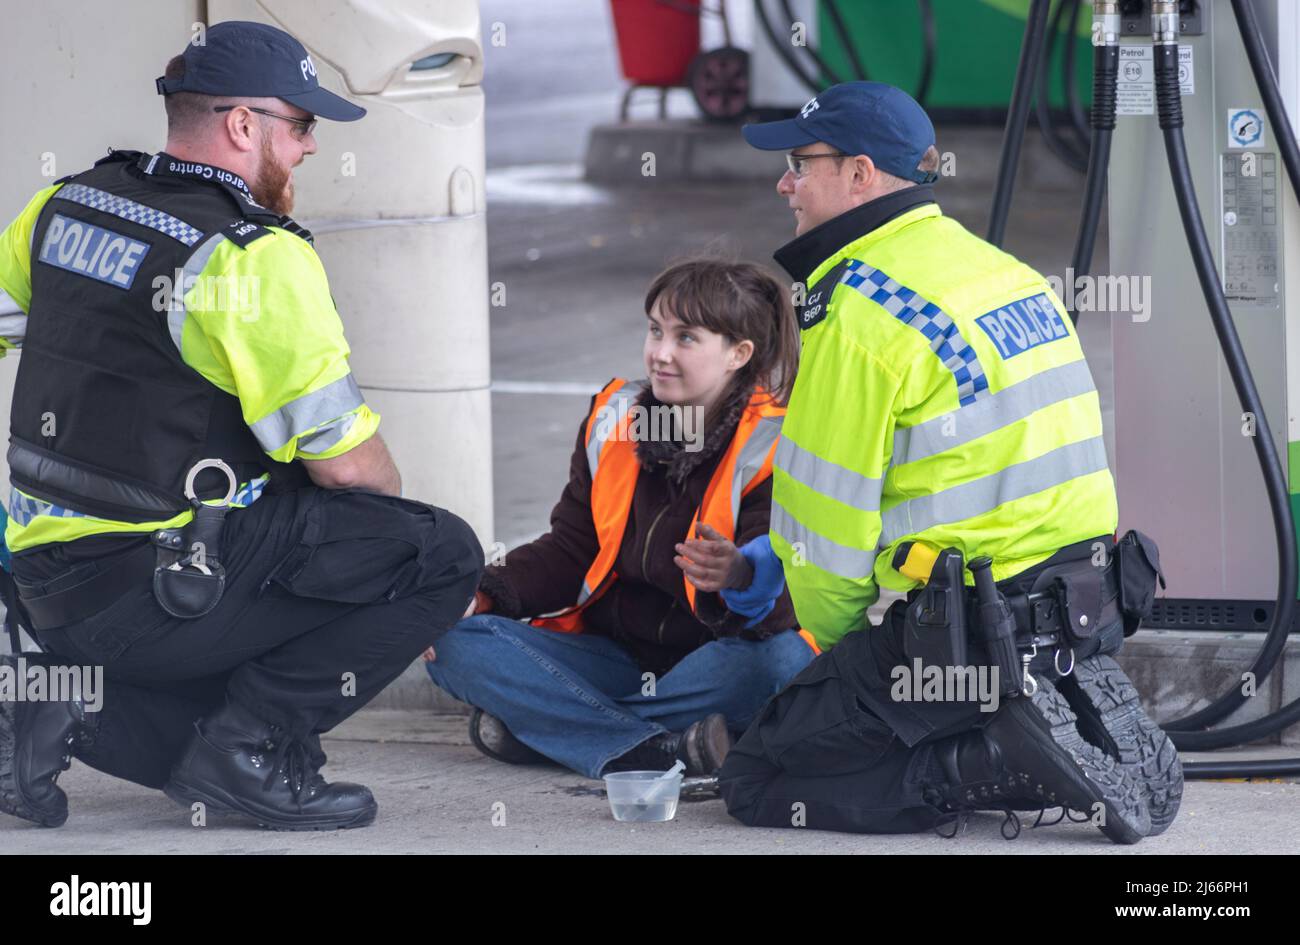 Kent, UK.  28 April 2022 Protesters from Just Stop Oil blockade the BP garage at Clacket Lane Services on the M25. Police arrive to unglue and arrest all of the protesters. Credit: Denise Laura Baker/Alamy Live News Stock Photo